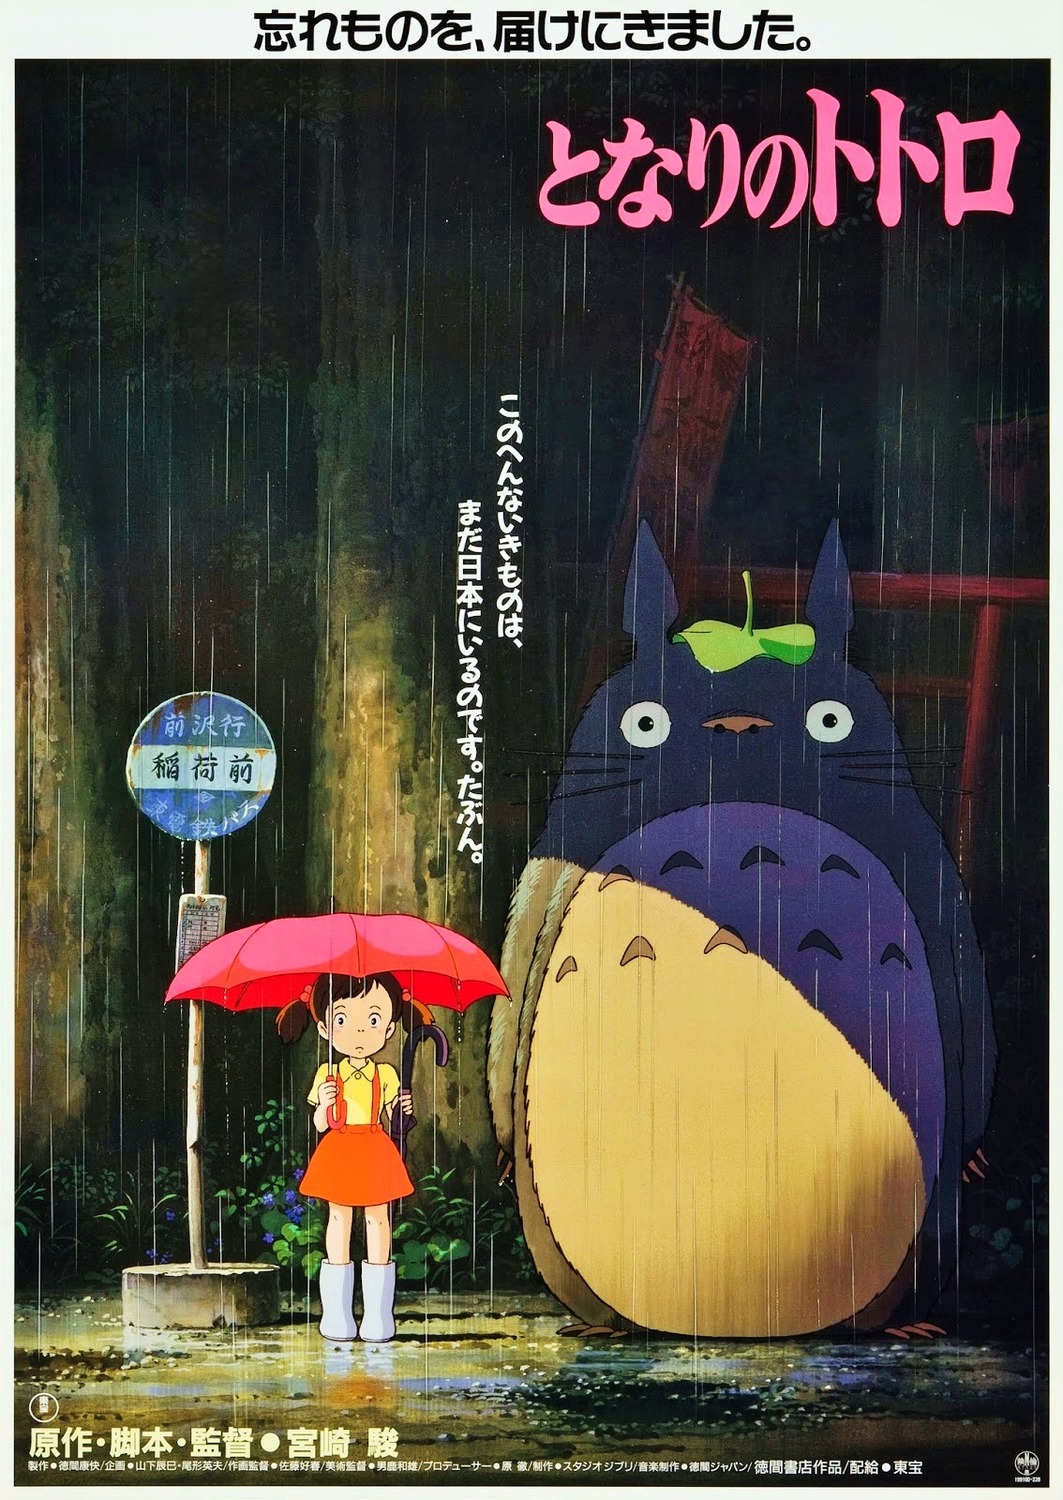 Extra Large Movie Poster Image for My Neighbor Totoro (#1 of 2)